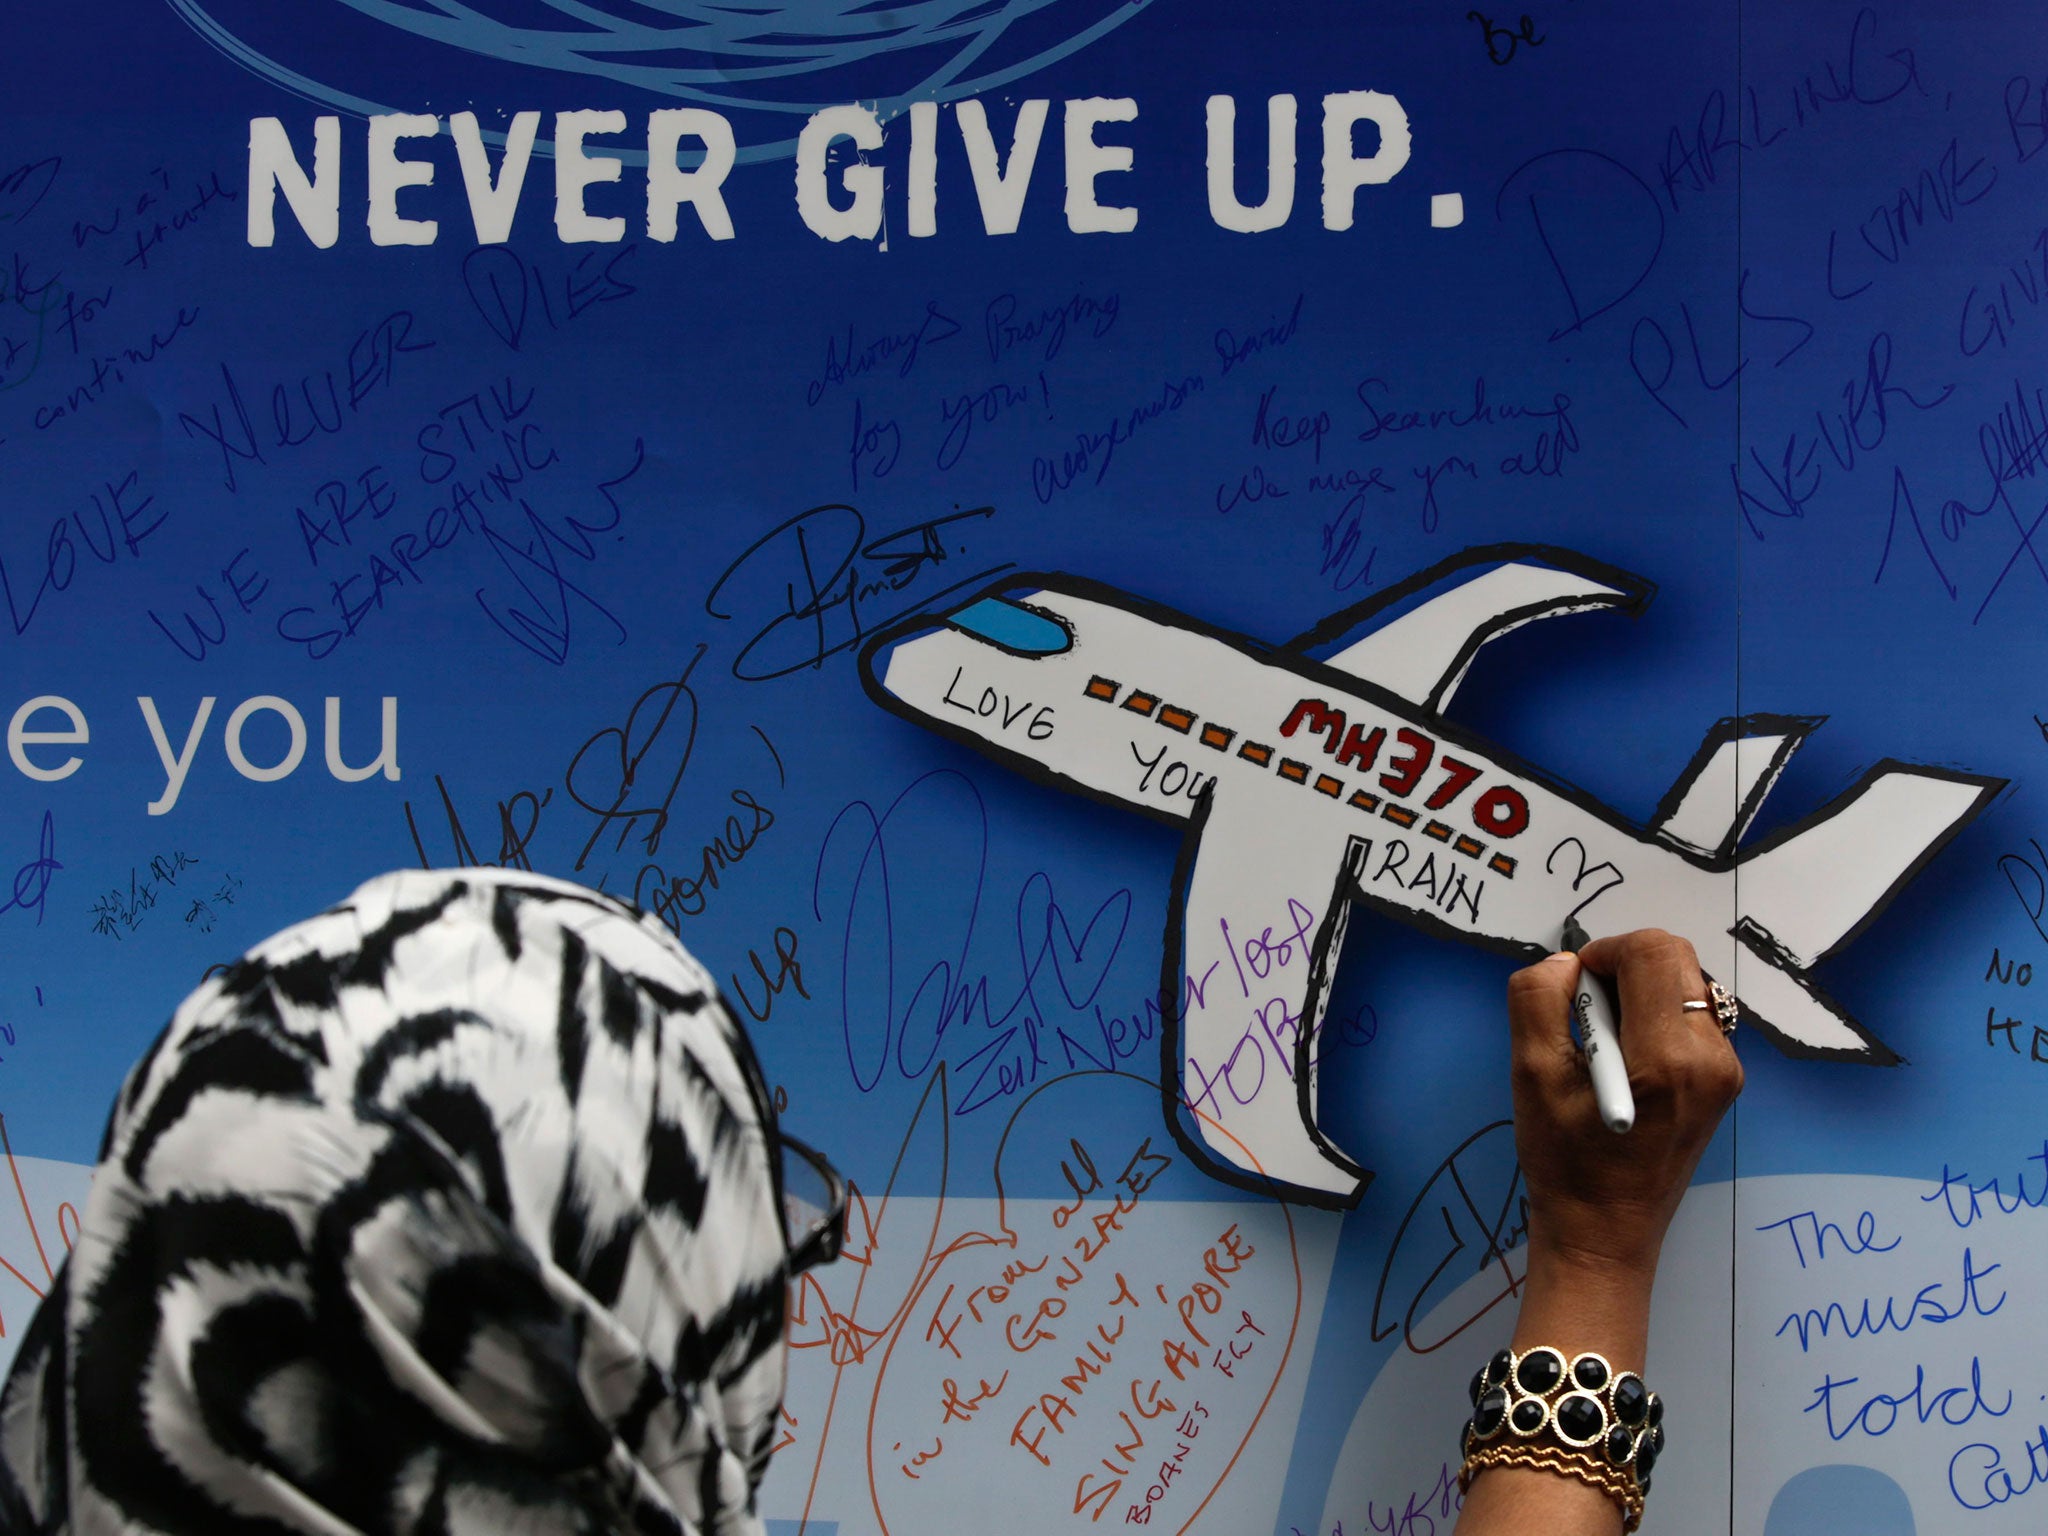 A woman writes messages for the passengers of flight MH370 on a banner during a remembrance ceremony to mark the second anniversary of the plane’s disappearance in Kuala Lumpur